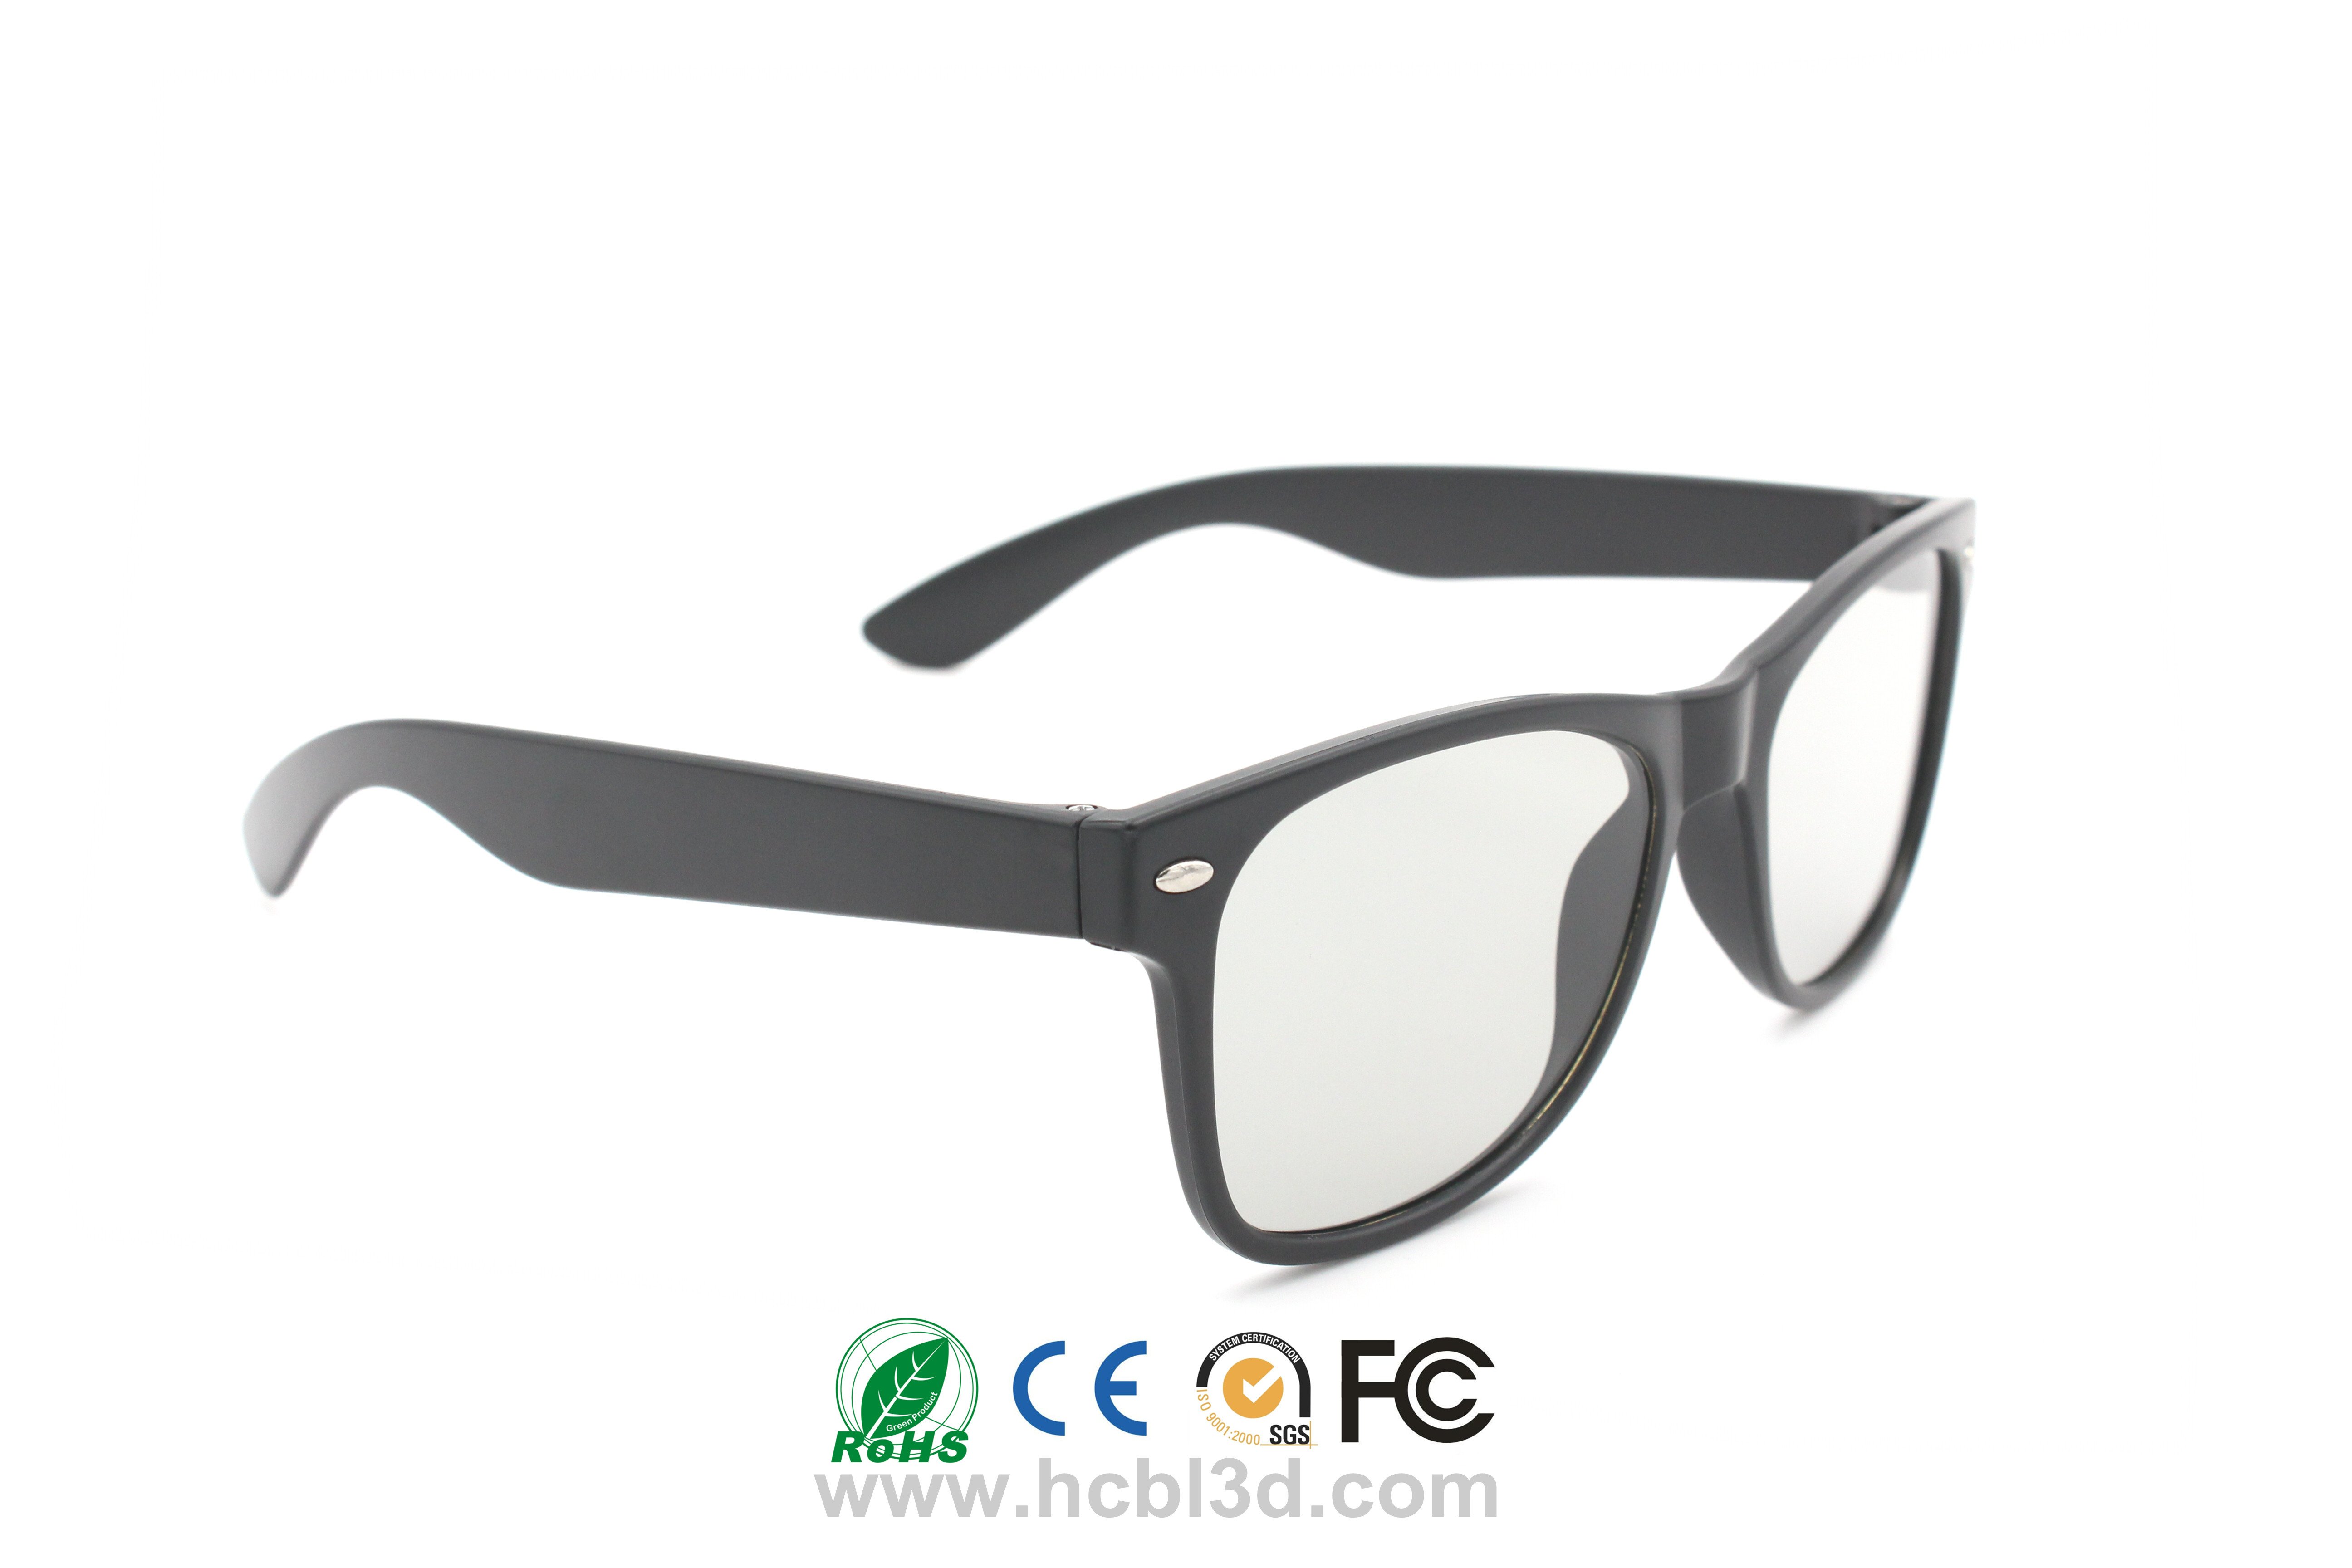 Reusable Polarized 3D Glasses for highly cost effective